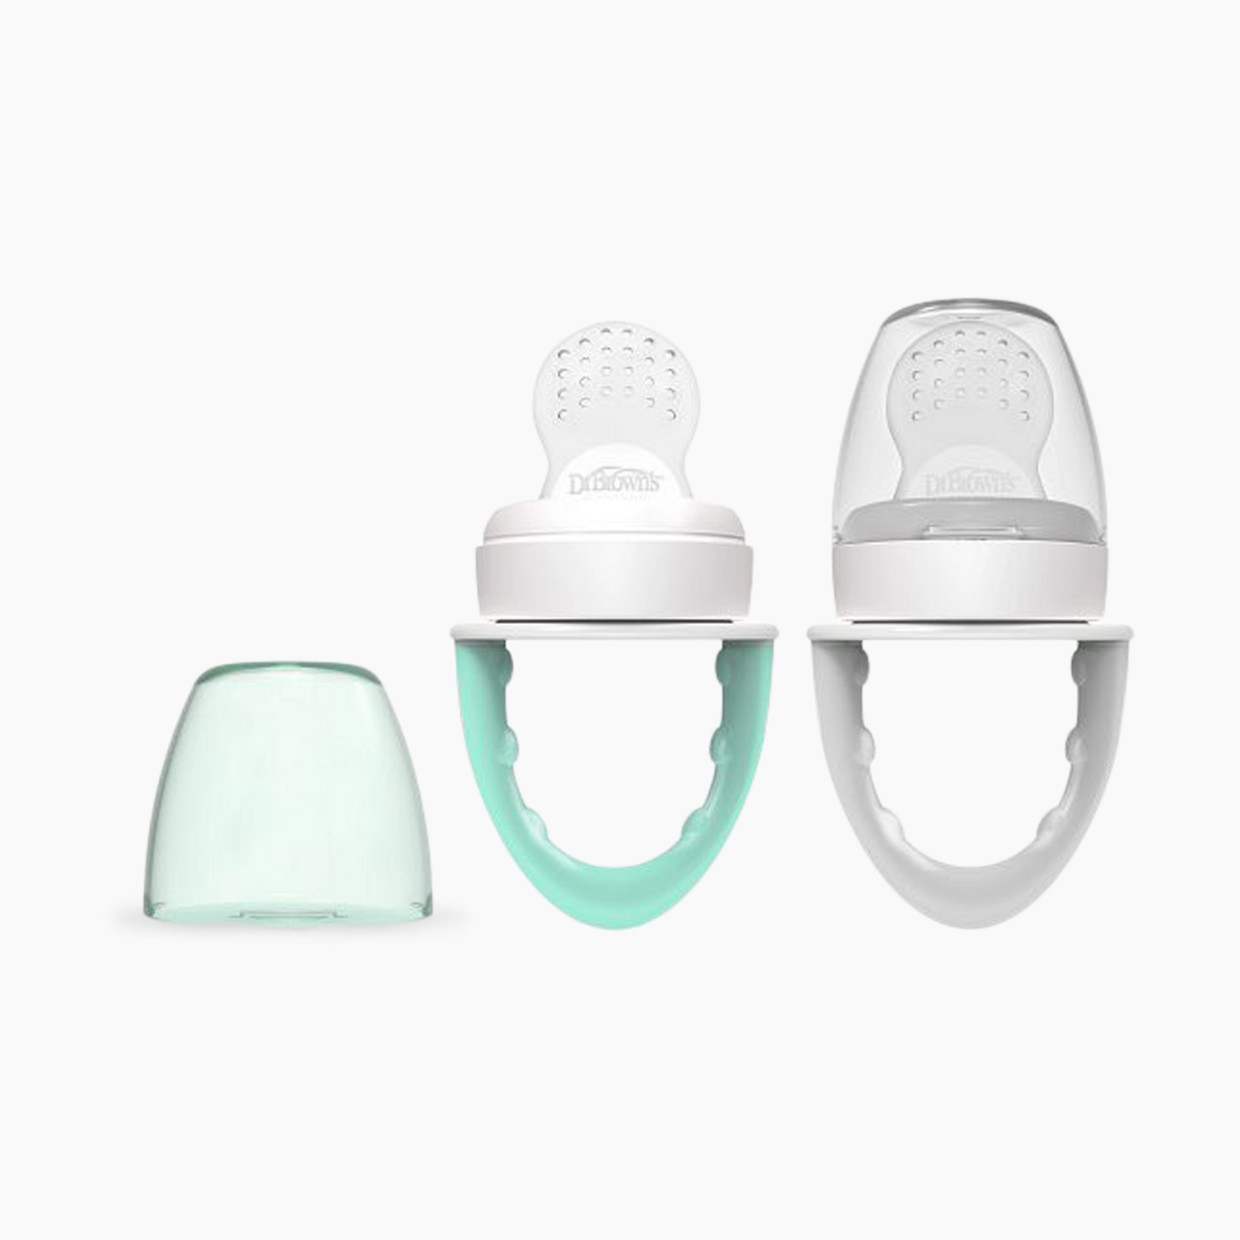 Dr. Brown's Fresh Firsts Silicone Feeder - Mint & Gray, 2.